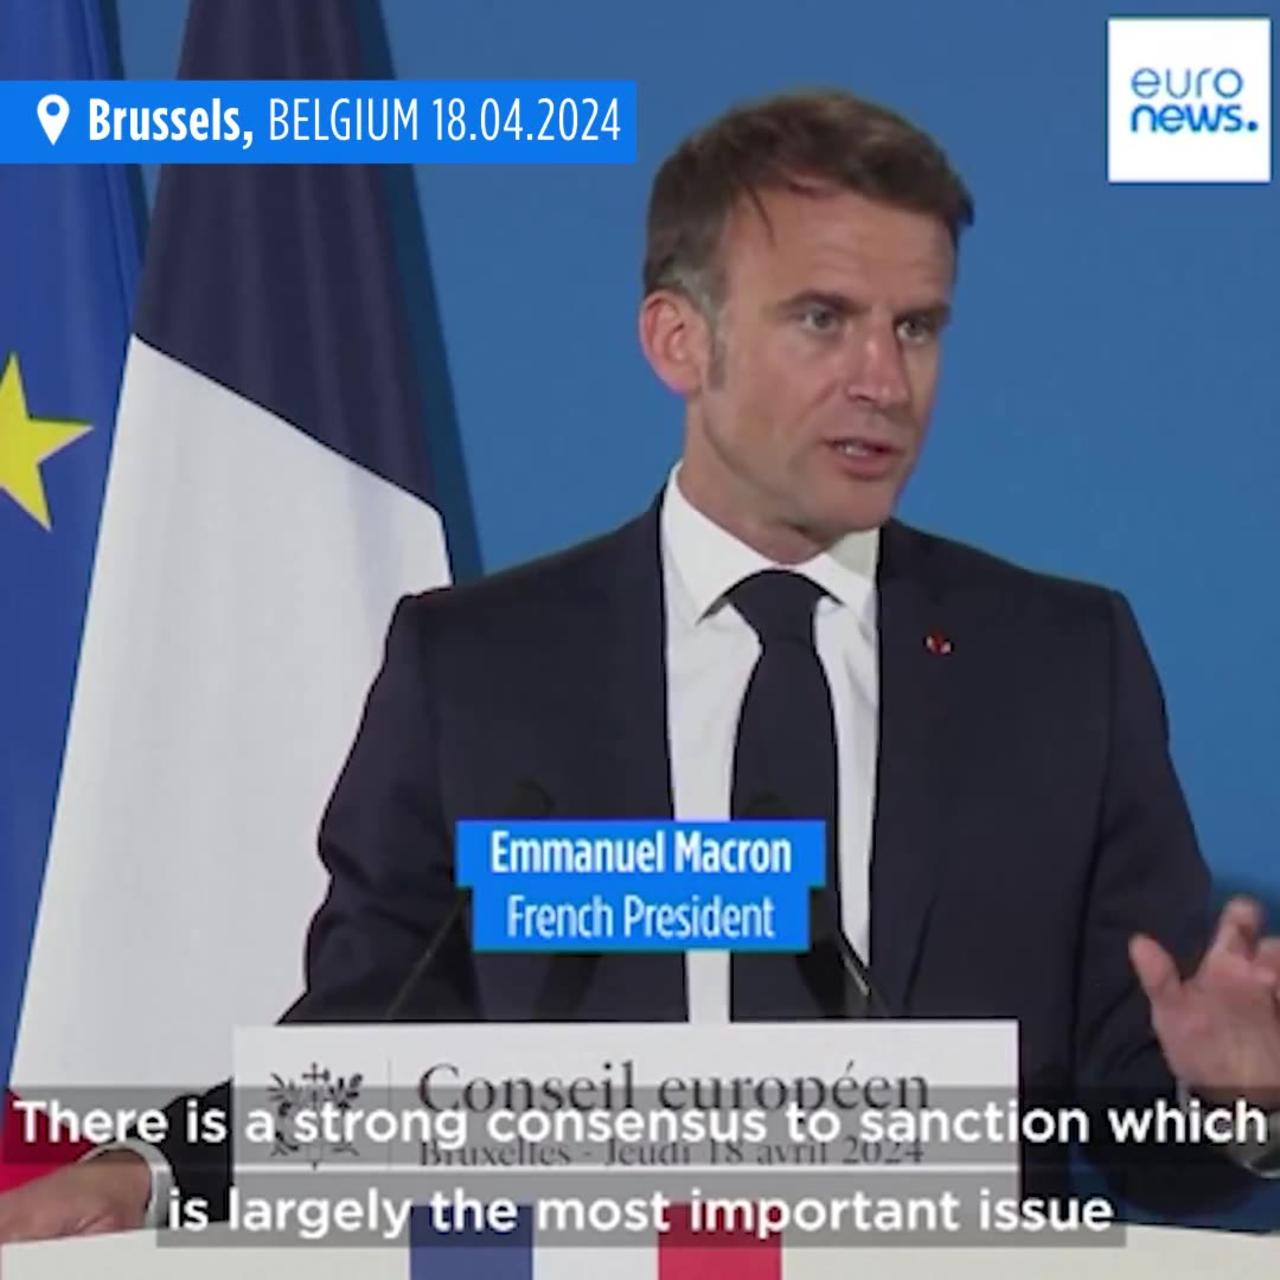 Macron says EU leaders agree on sanctions to 'contain' Iran's nuclear activities.